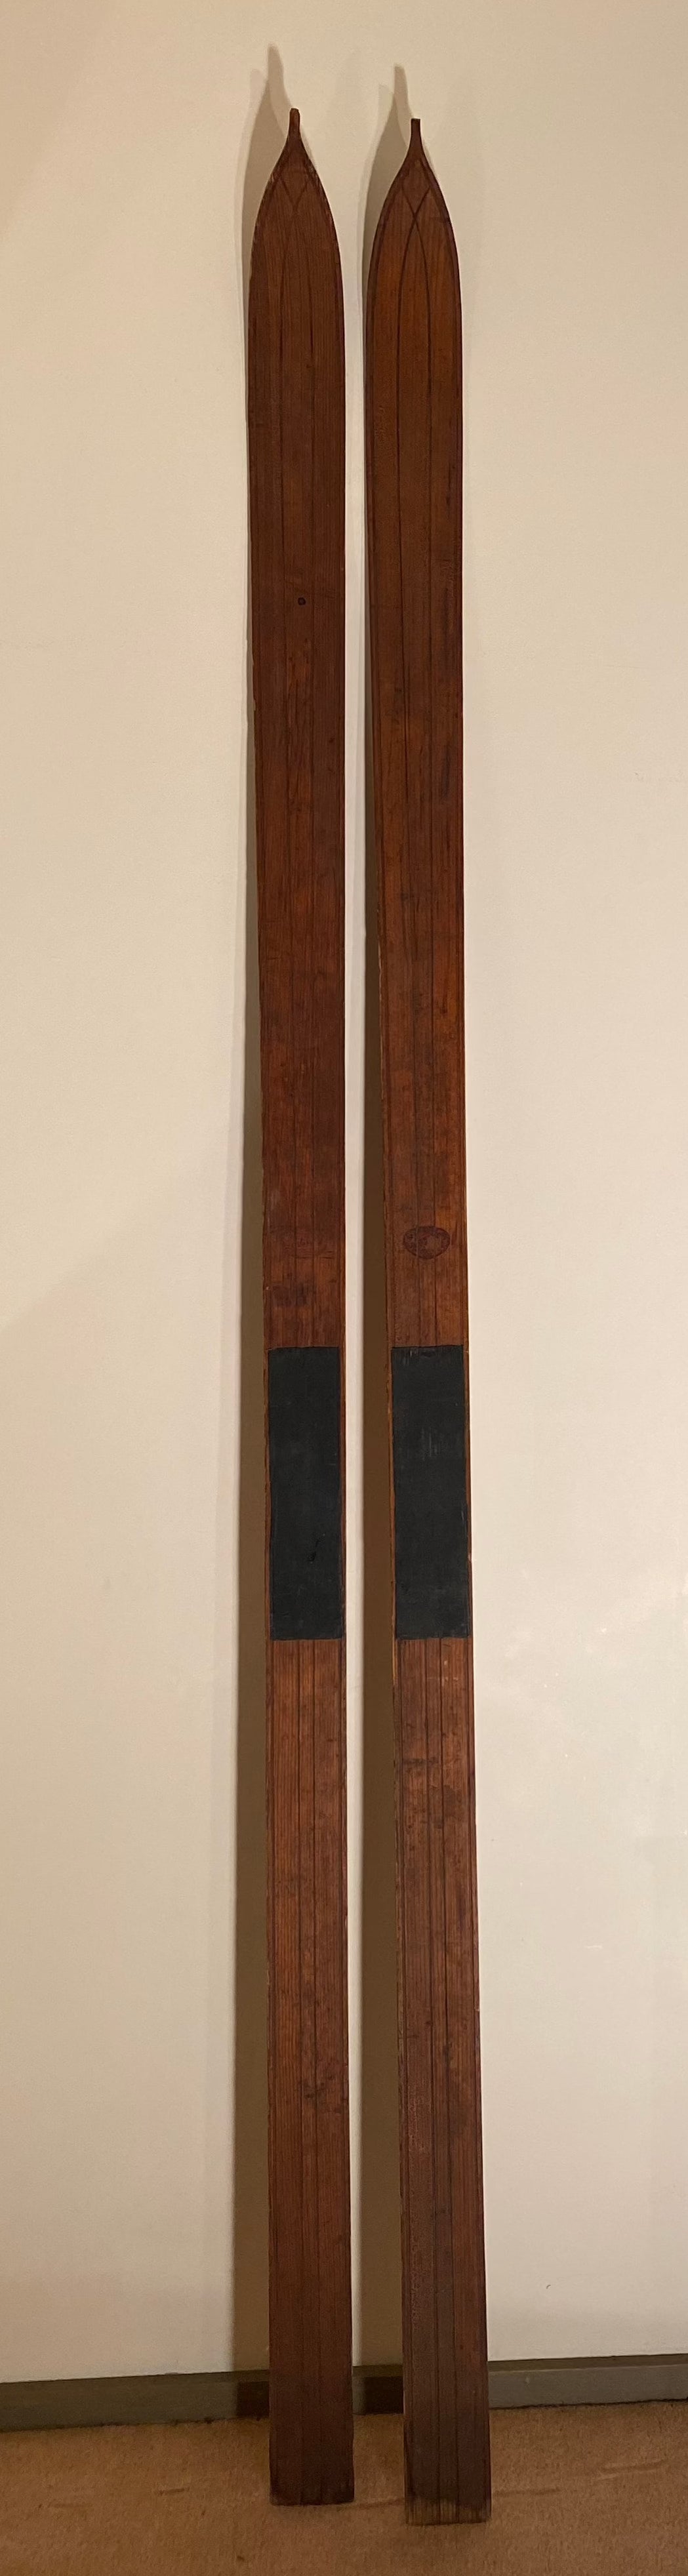 Strand Wooden Skis front view